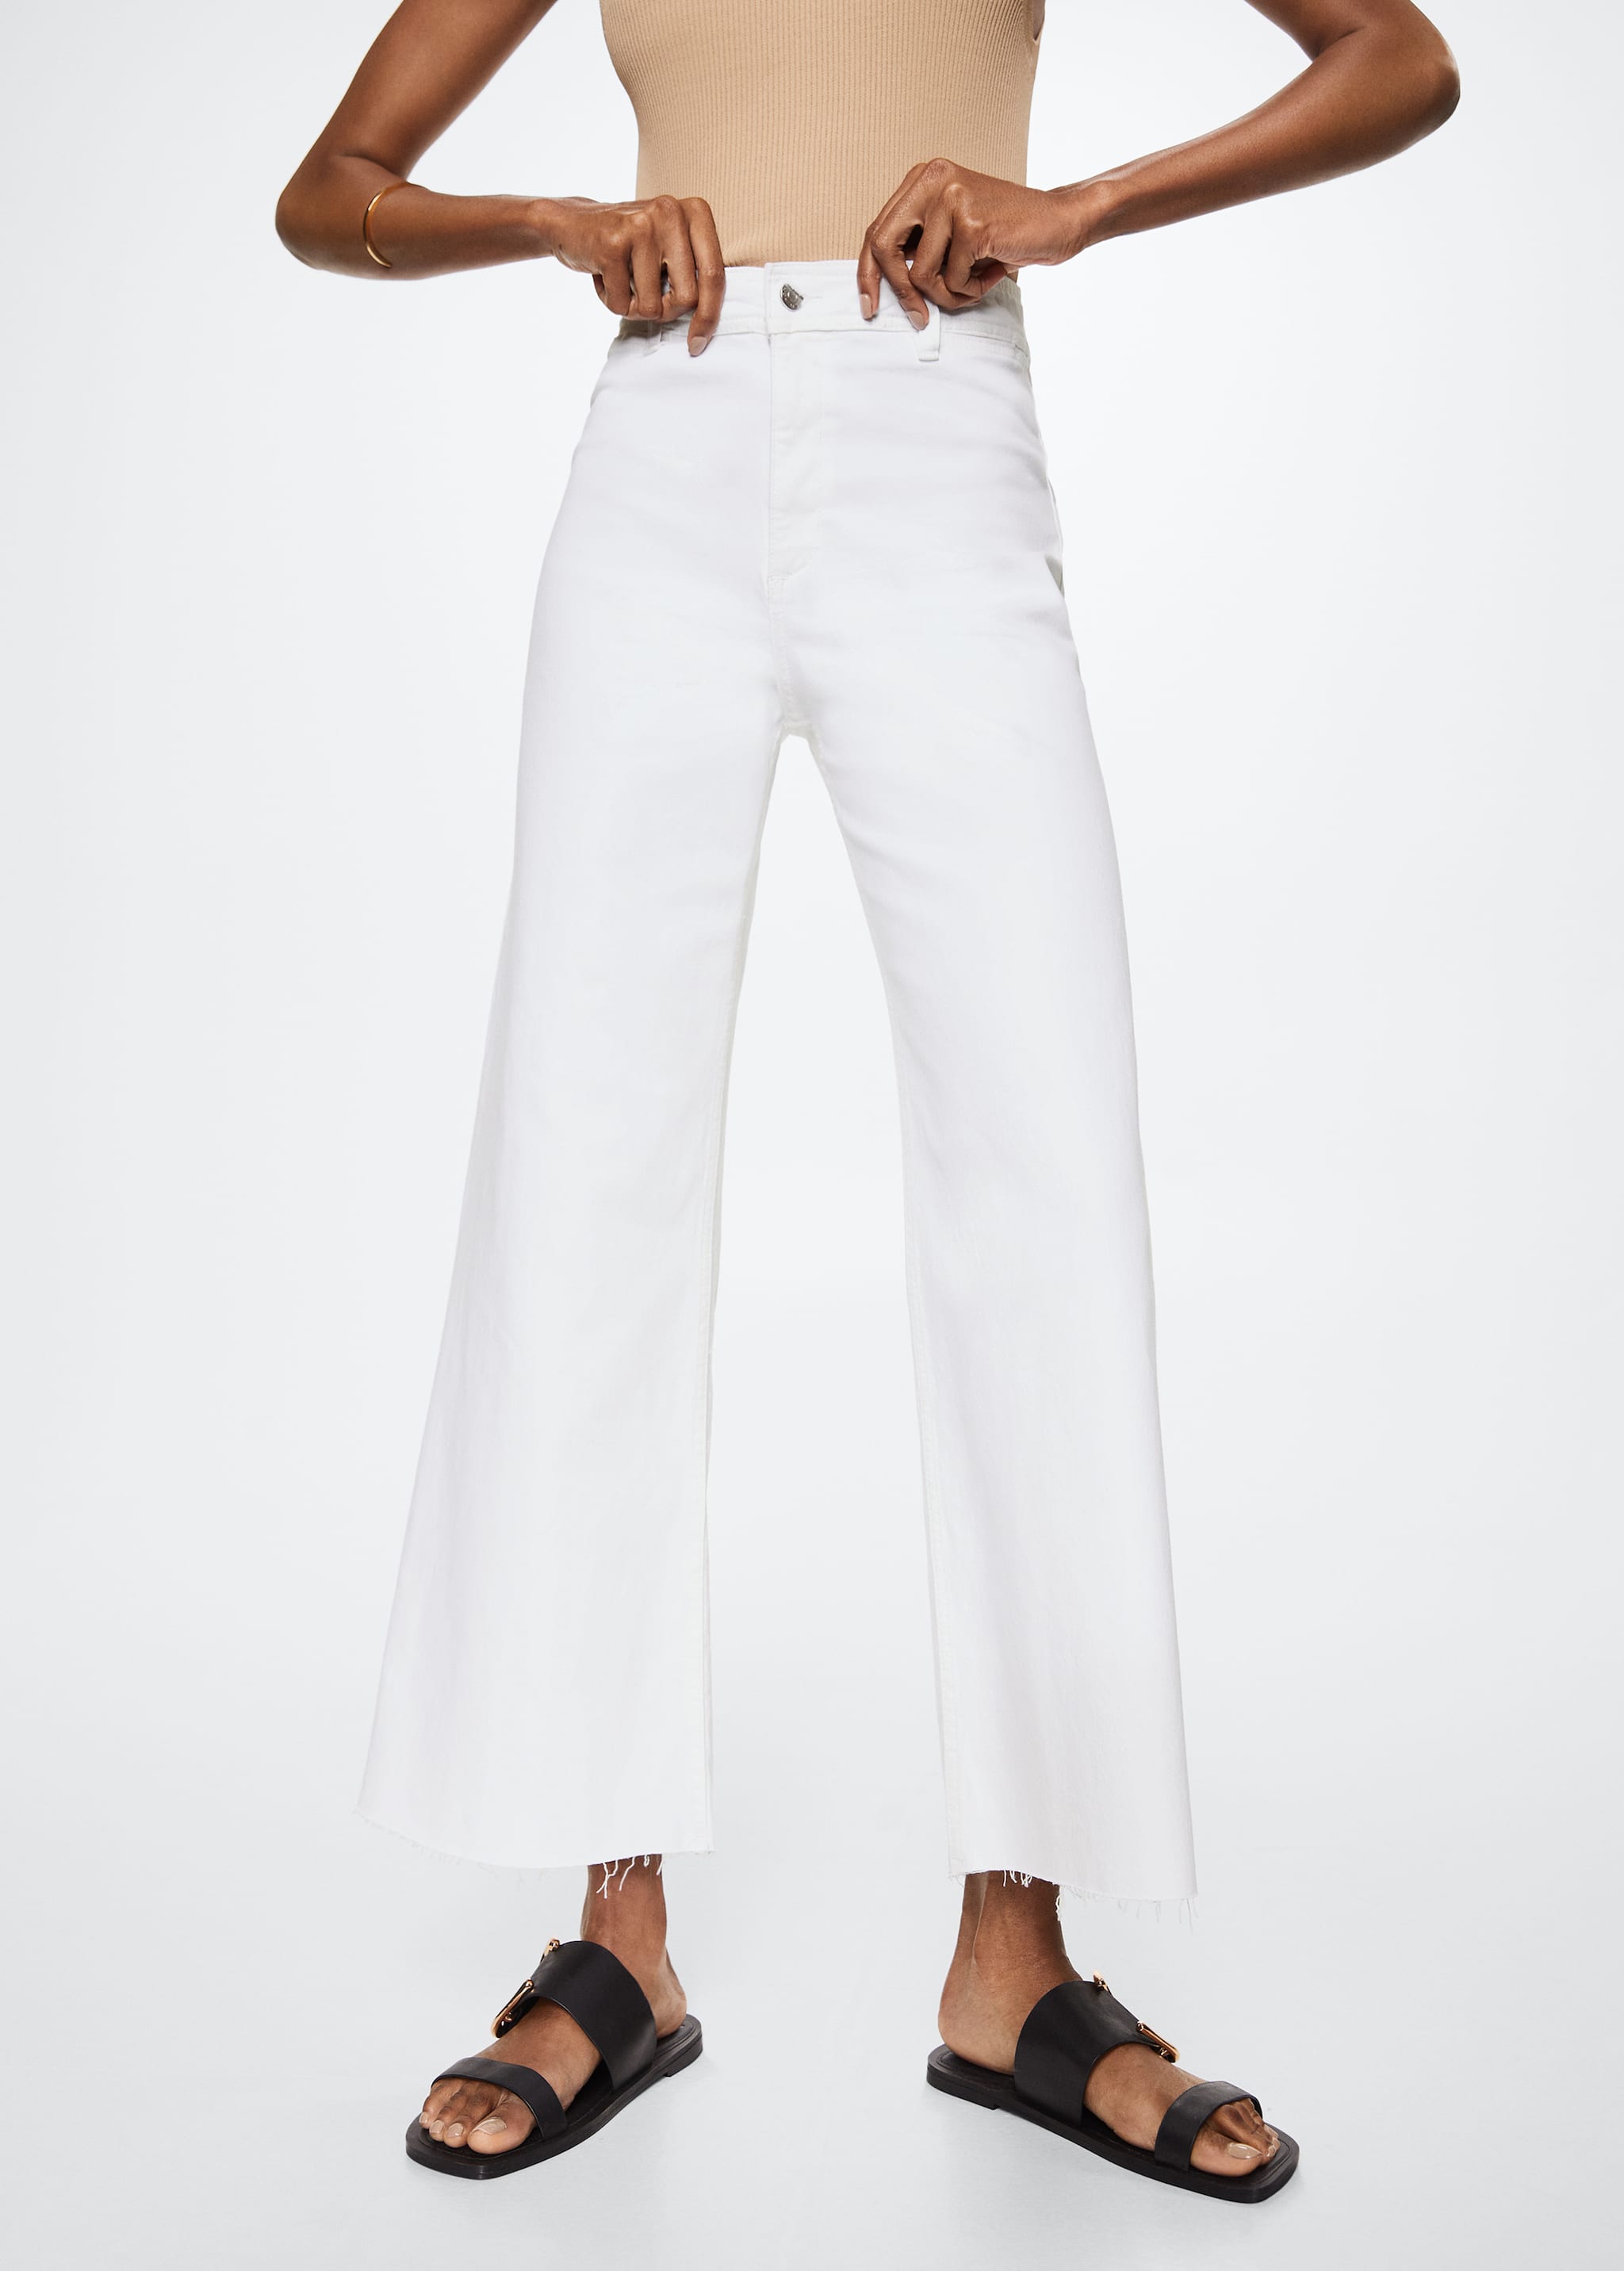 Jeans culotte high waist - Details of the article 2